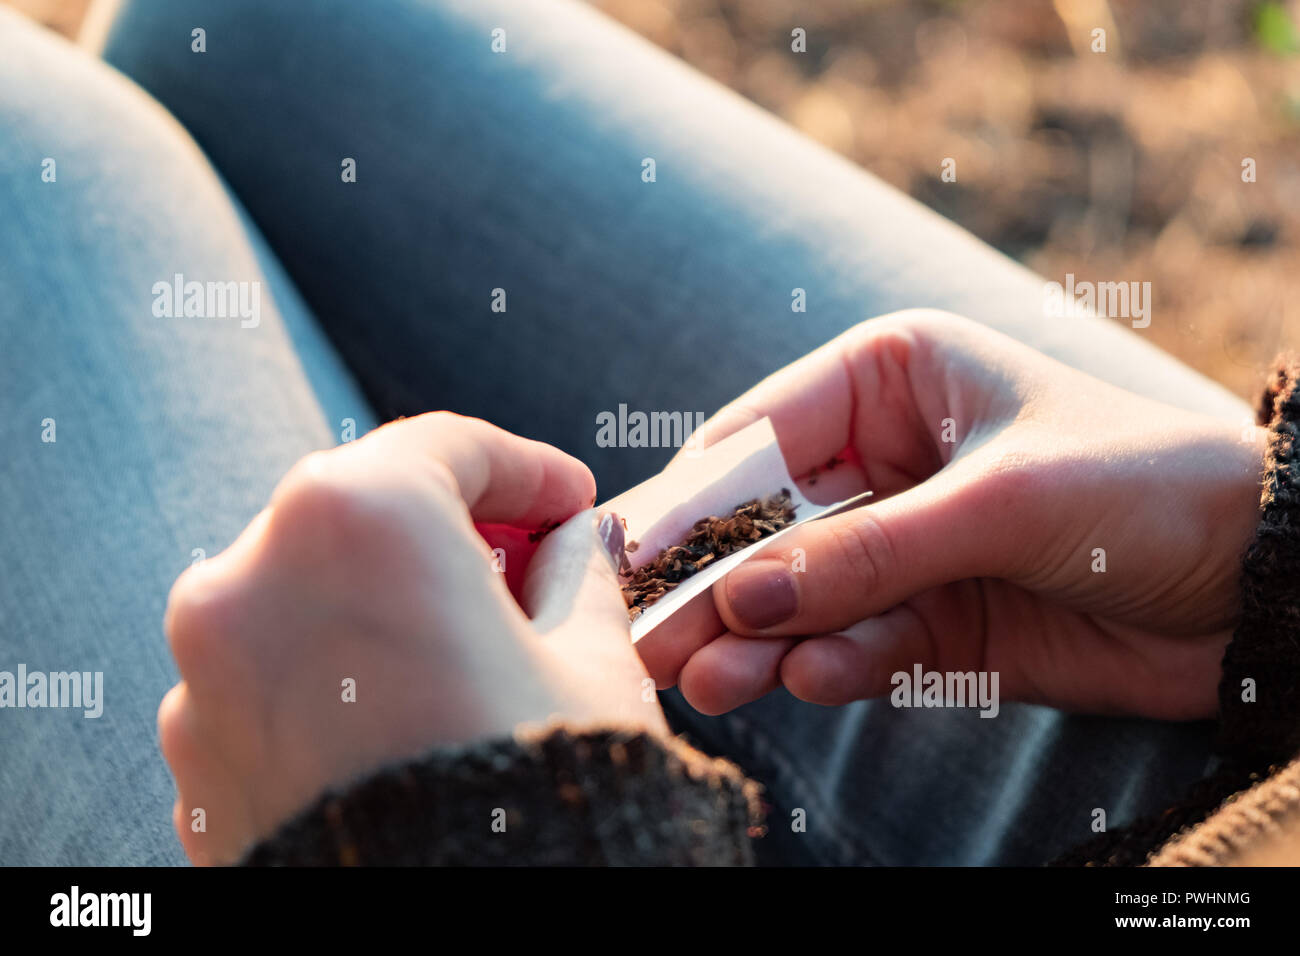 Rolling a tobacco cigarette. Close up image of female hands making a joint outdoors in sunlit background Stock Photo